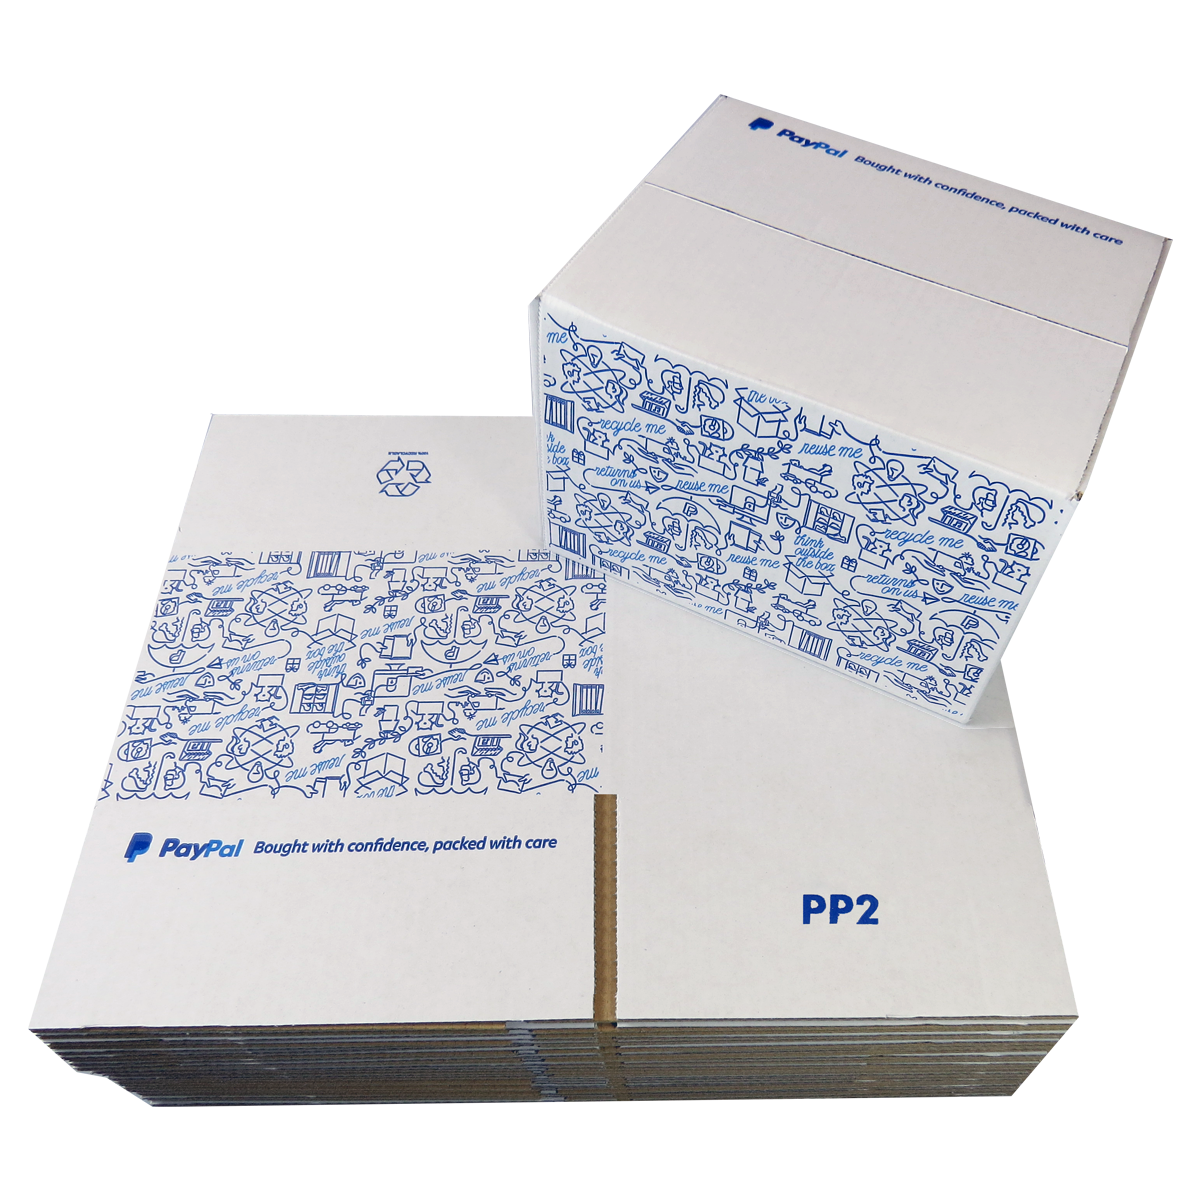 50 x PP2 PayPal Branded Quality White Single Wall Cardboard Postal Mailing Boxes 215x180x135mm